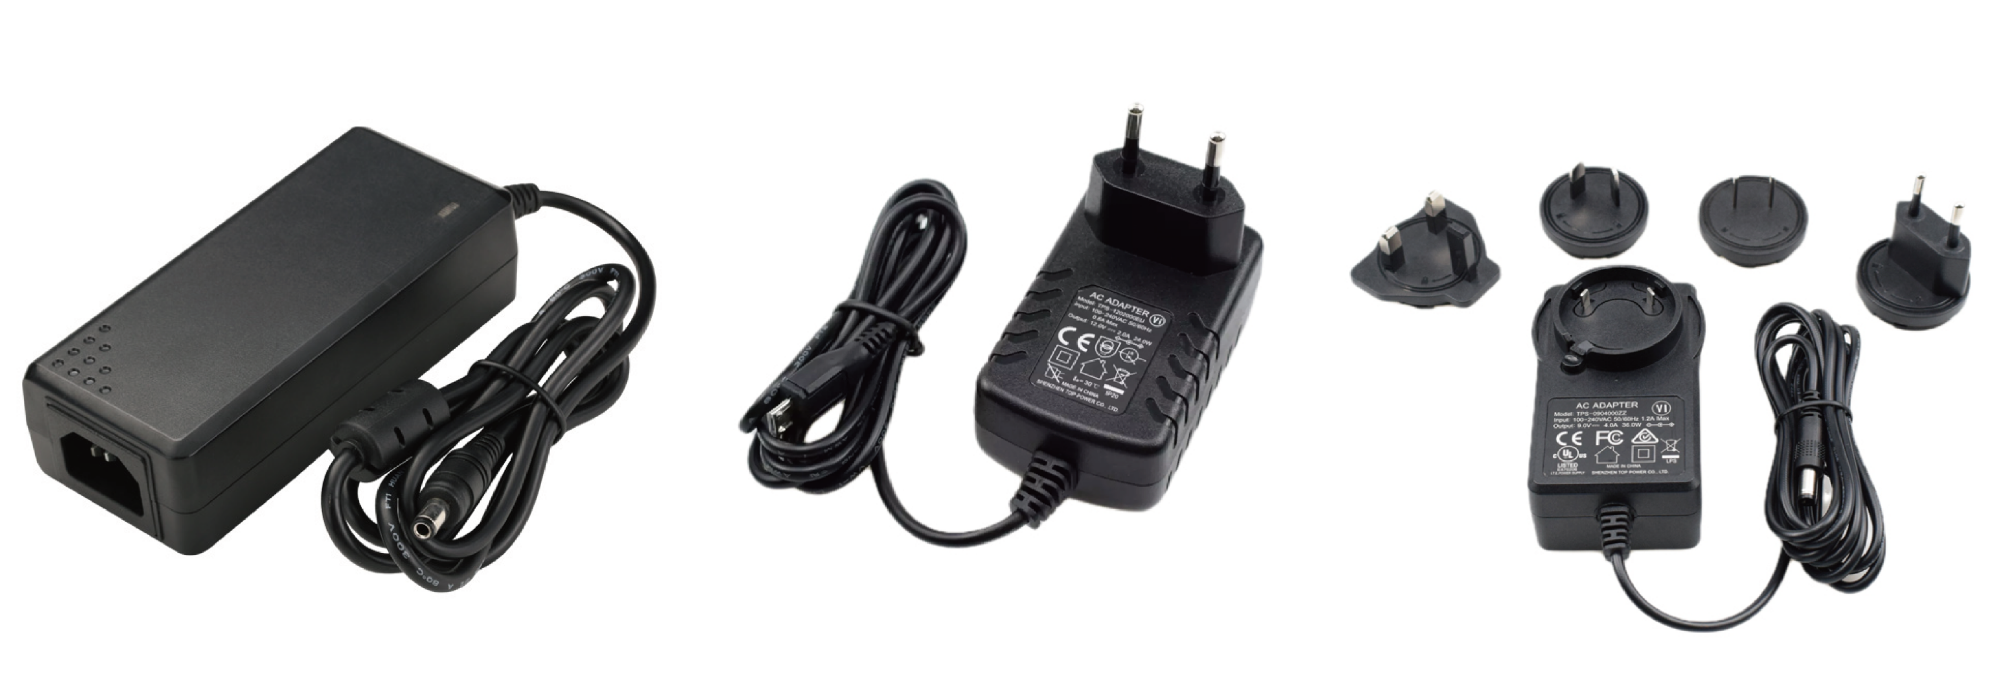 How to select an External Power Supply?